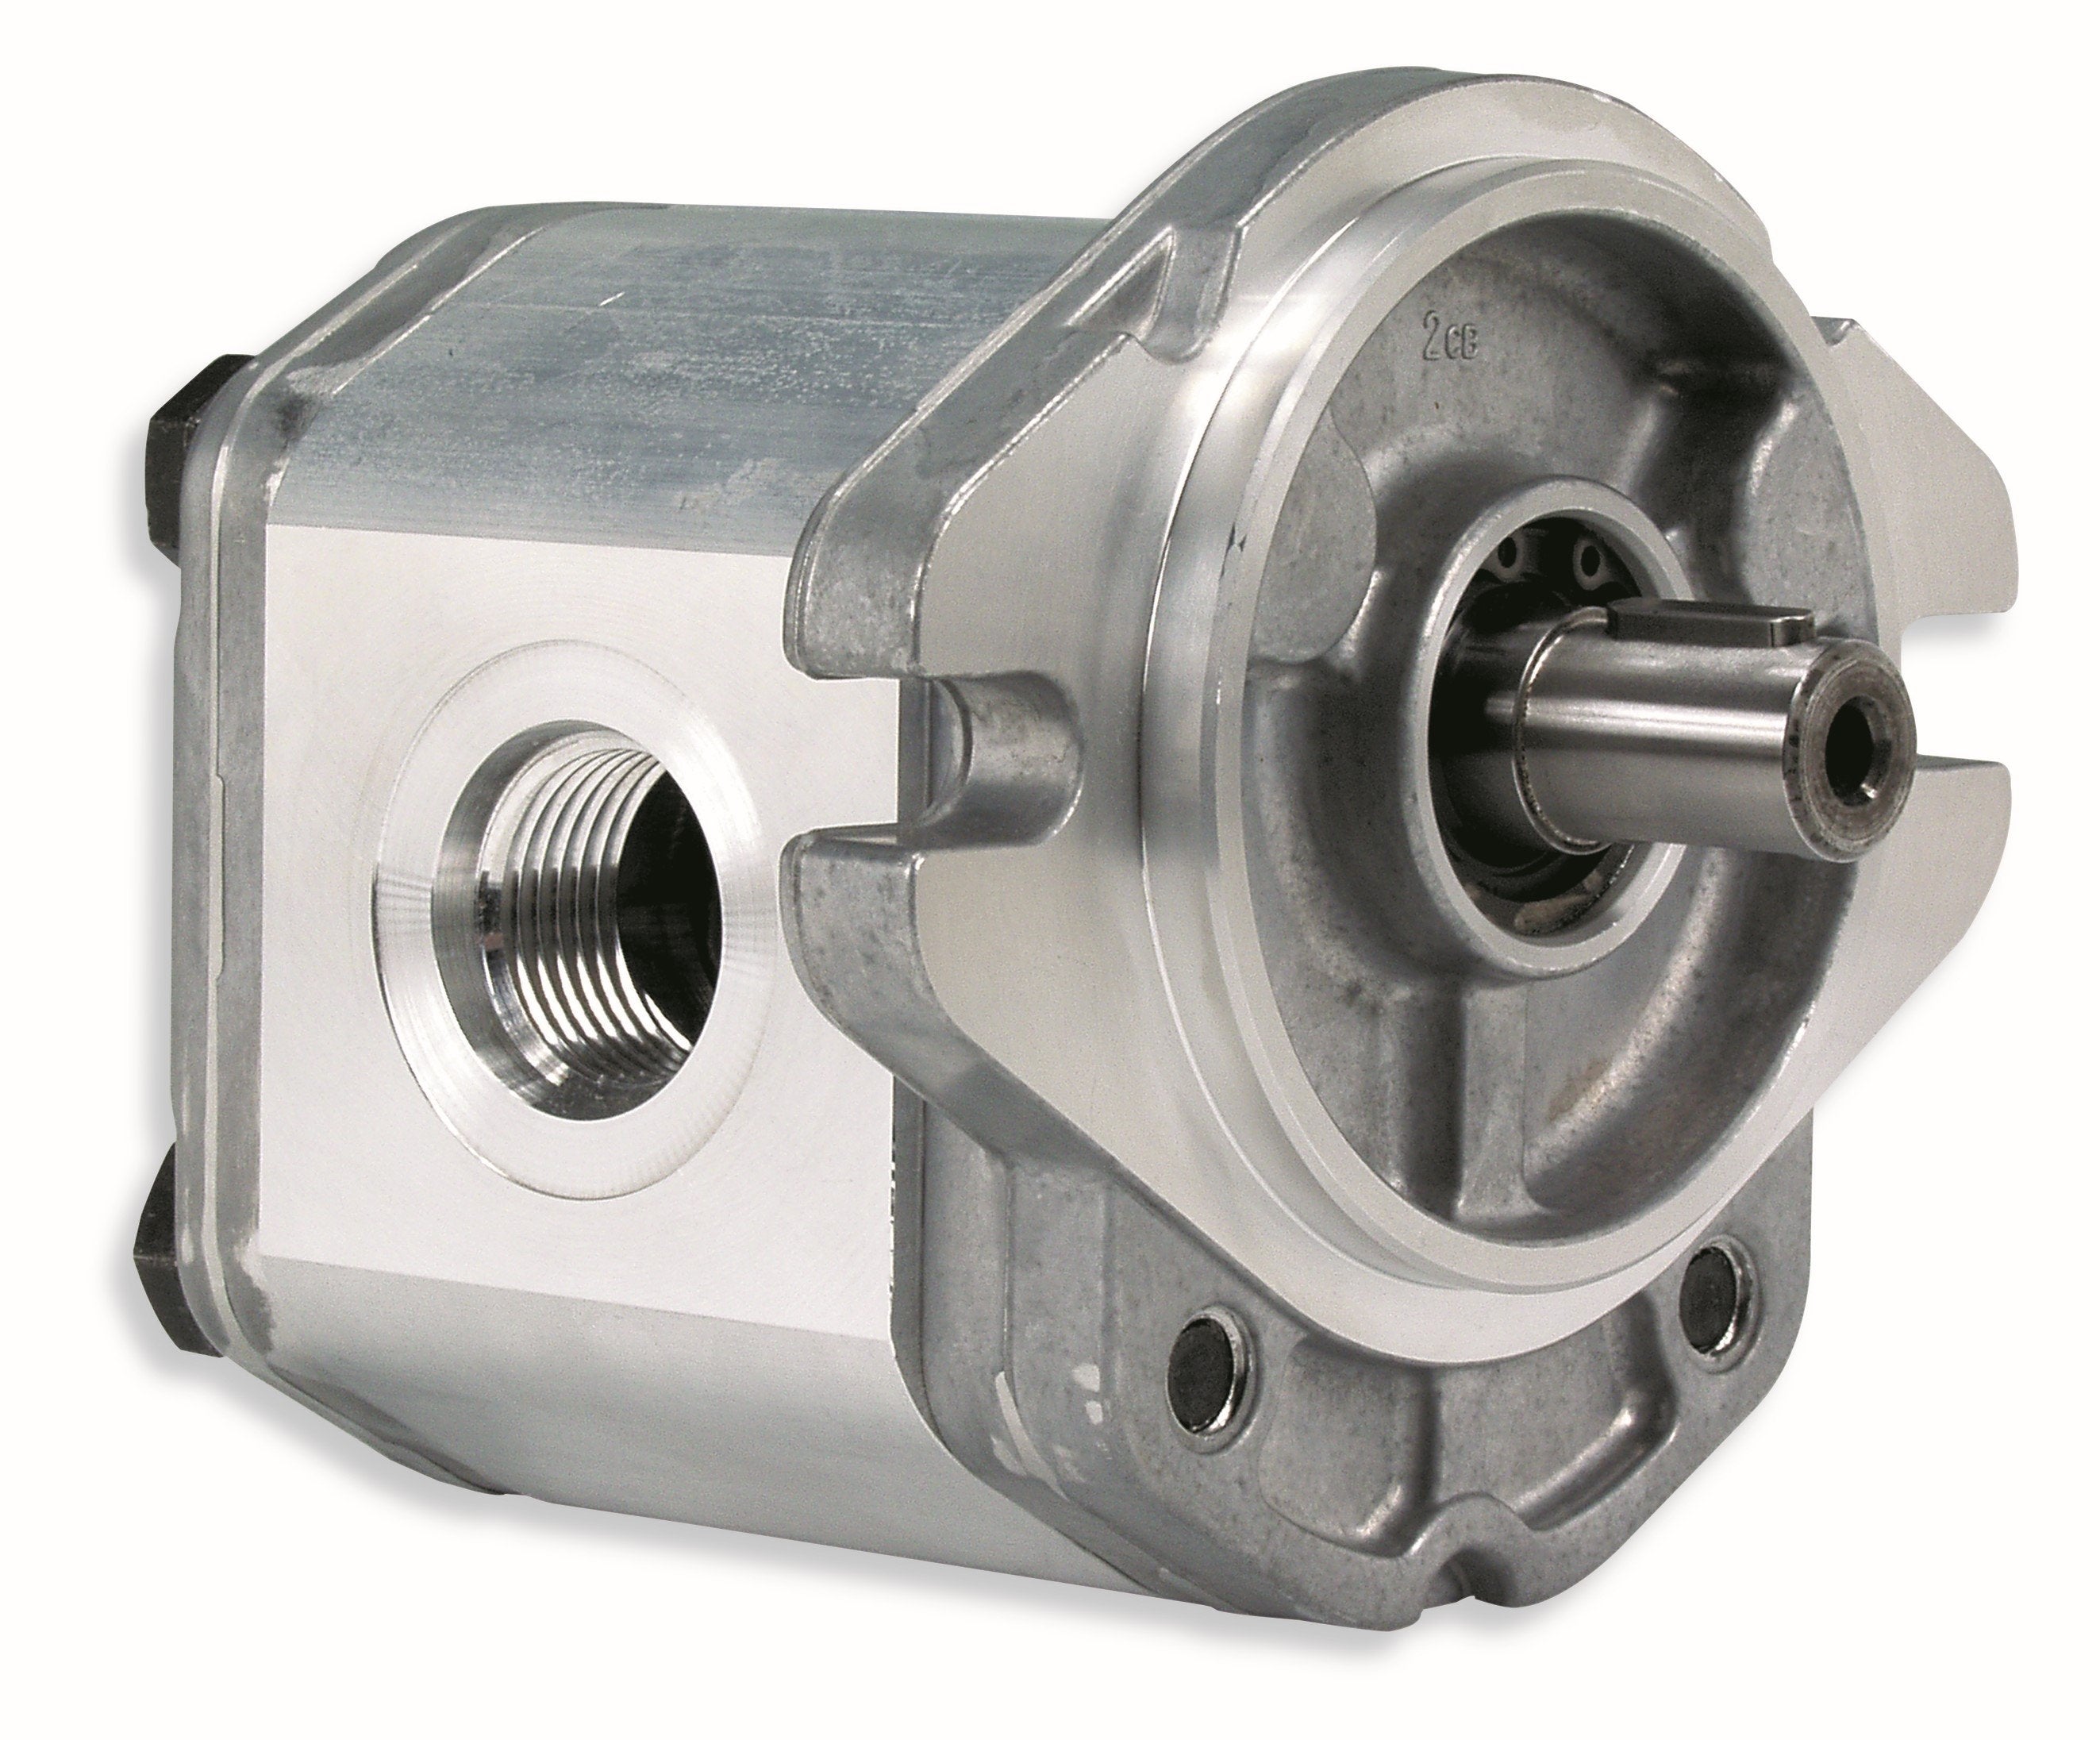 GHM1A-R-5-S1-E2 : Marzocchi Gear Motor, Bidirectional, 3.5cc, 3915psi rated, 5000RPM, 0.5 (1/2") #8 SAE ports, 9T 20/40DP Splined Shaft